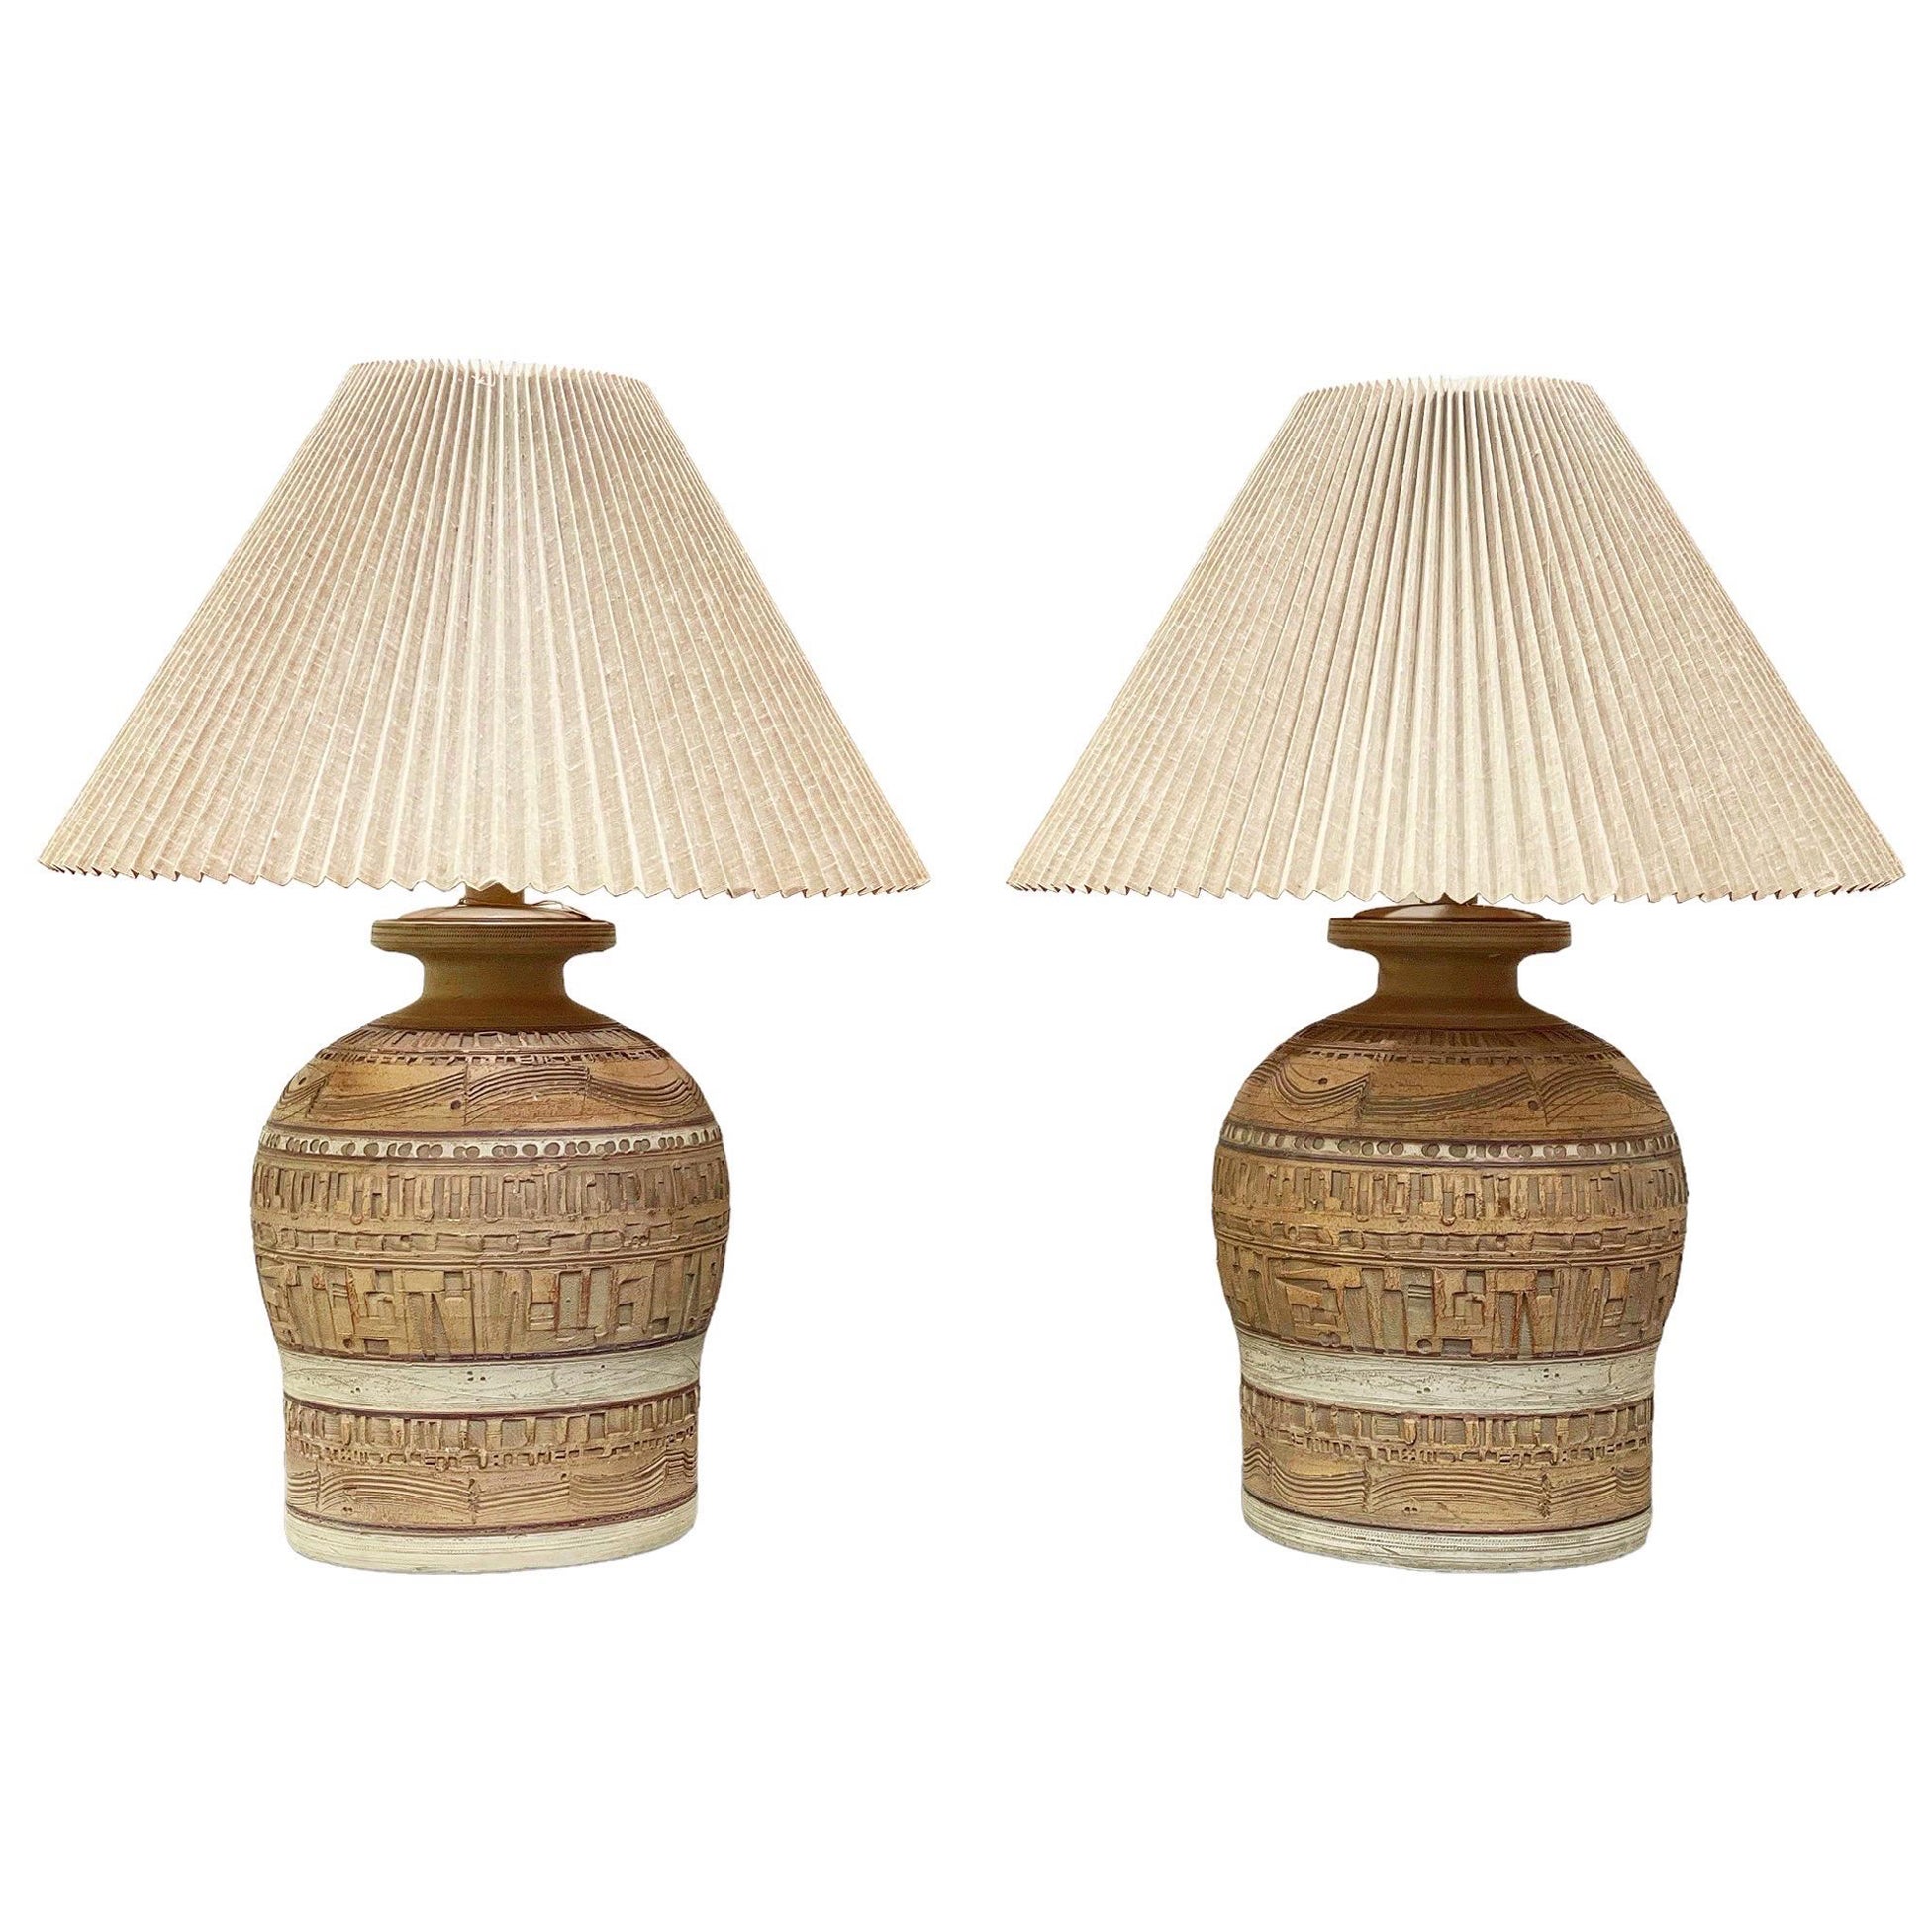 Pair Midcentury Sculpted Earthenware Table Lamps by Casual Lamps, circa 1979